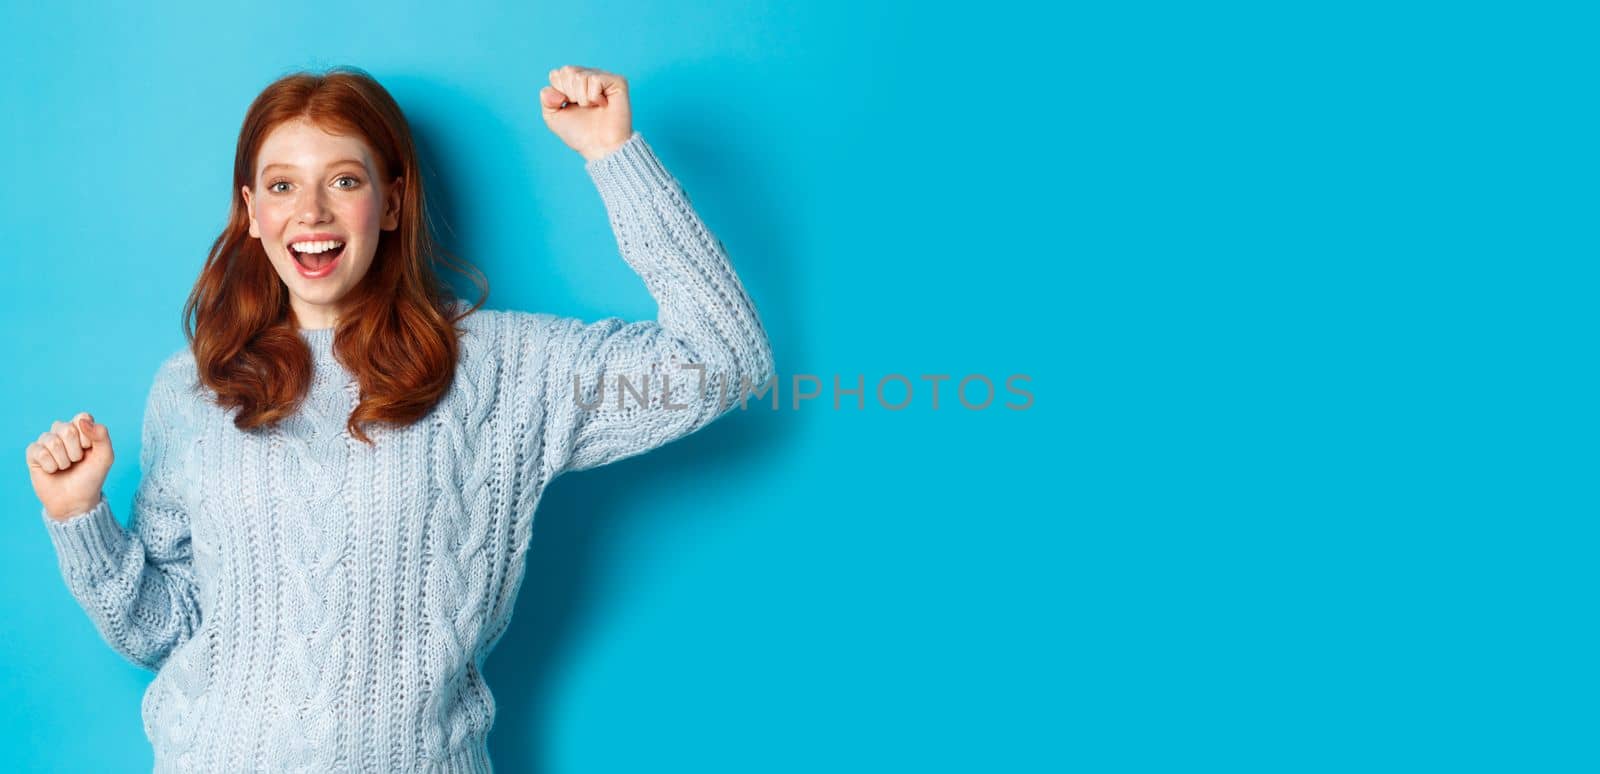 Cheerful redhead gil winning, celebrating victory, smiling and jumping from happiness, posing against blue background.